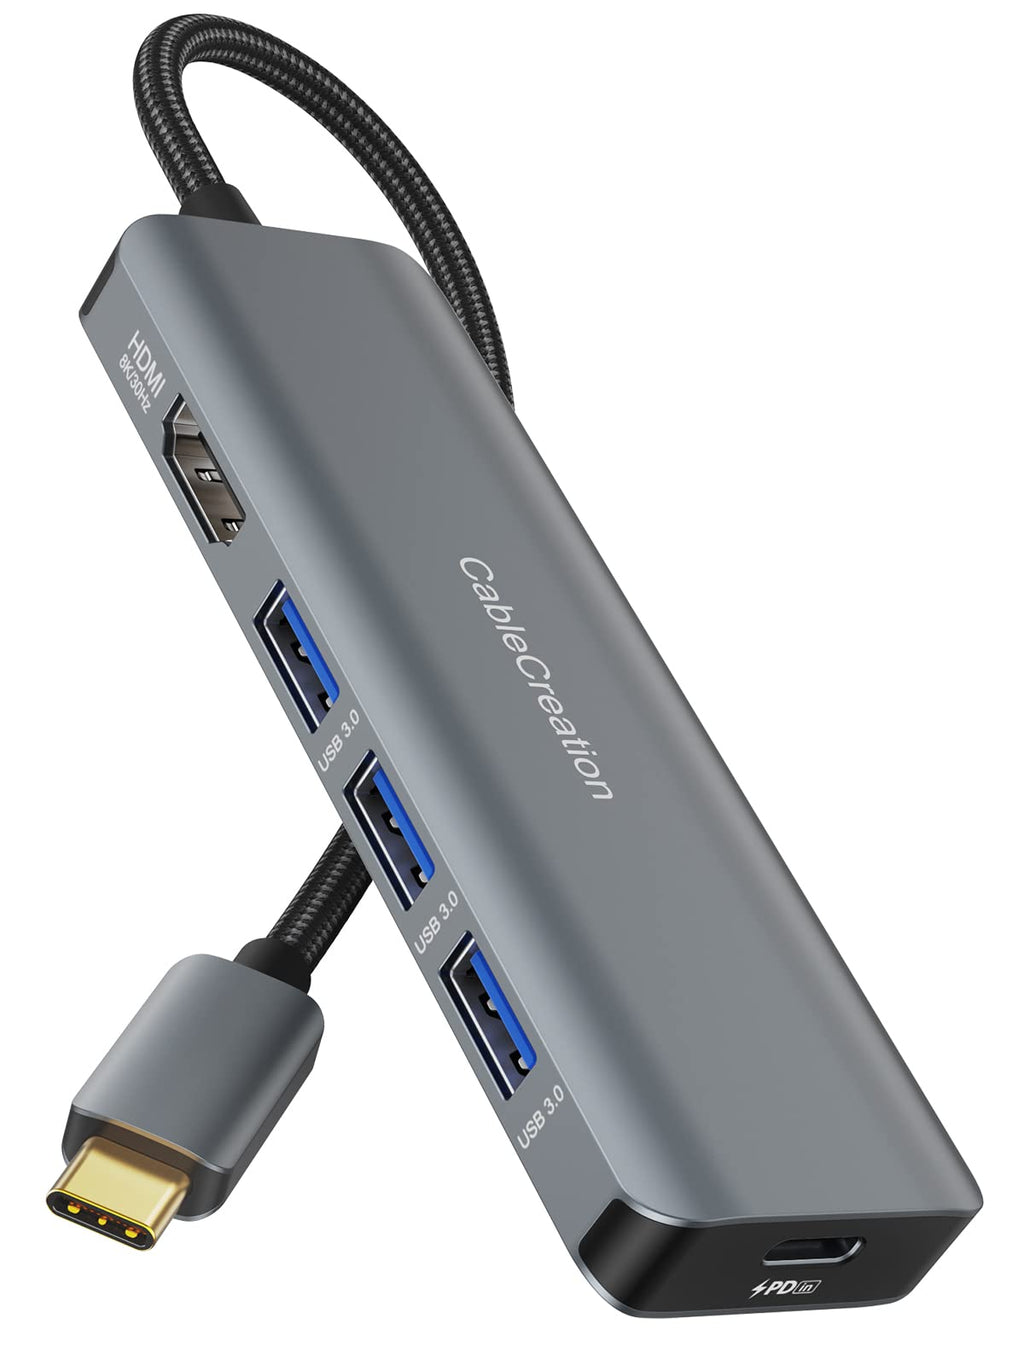  [AUSTRALIA] - 8K HDMI USB C Hub, CableCreation 5-in-1 USB C Multiport Adapter for Charging,100W Power Delivery 3 USB 3.0 Port Compatibile with Steam Deck,MacBook pro/Air M1/M2,Surface Pro,XPS 8K@30Hz